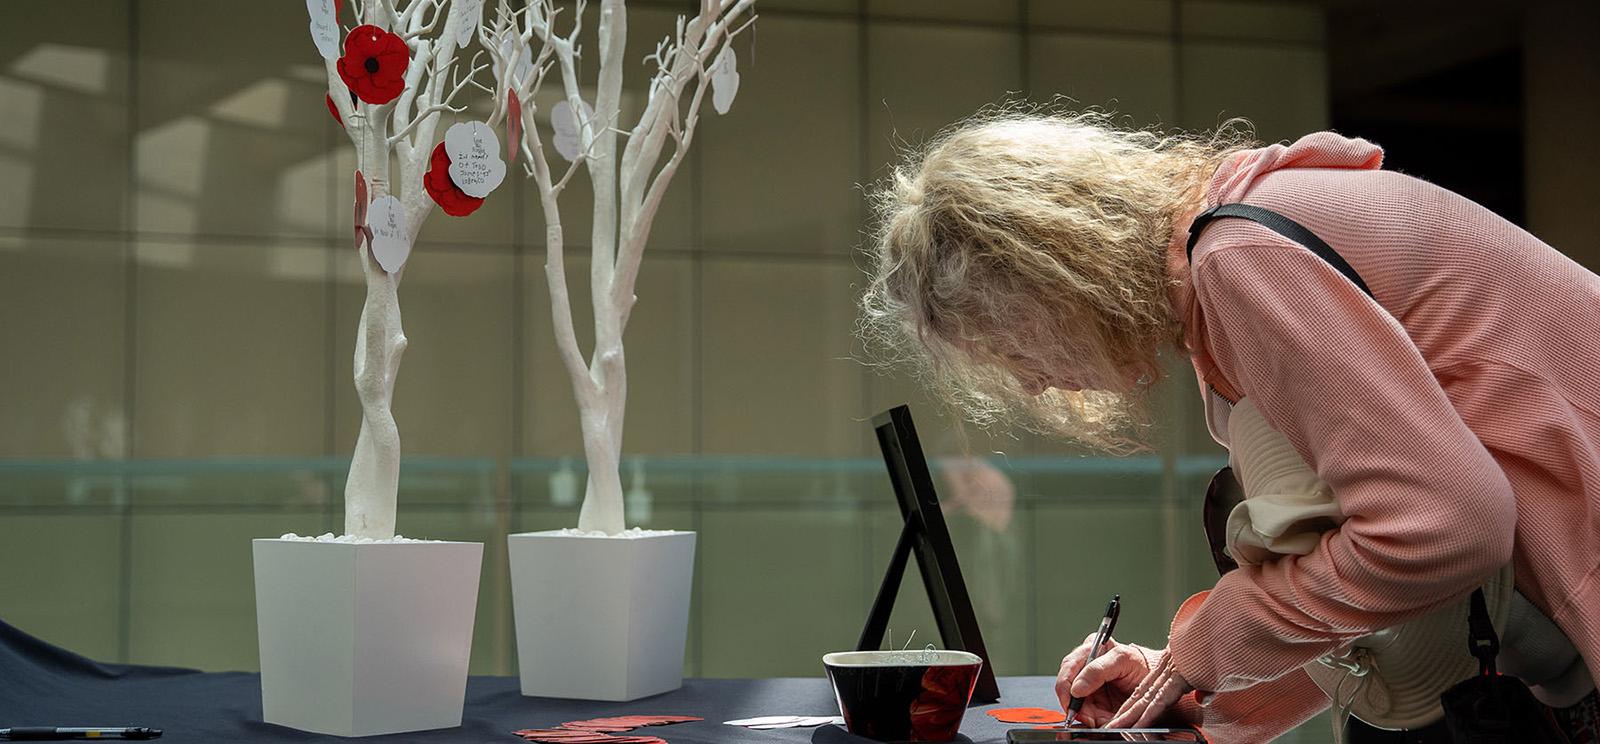 Modern photograph of a table on the Glass Bridge. Several small artificial trees painted white, with red paper poppies hung on their branches, stand on the table. A white woman with blonde hair is bent over the table writing something on a paper poppy with a pen.